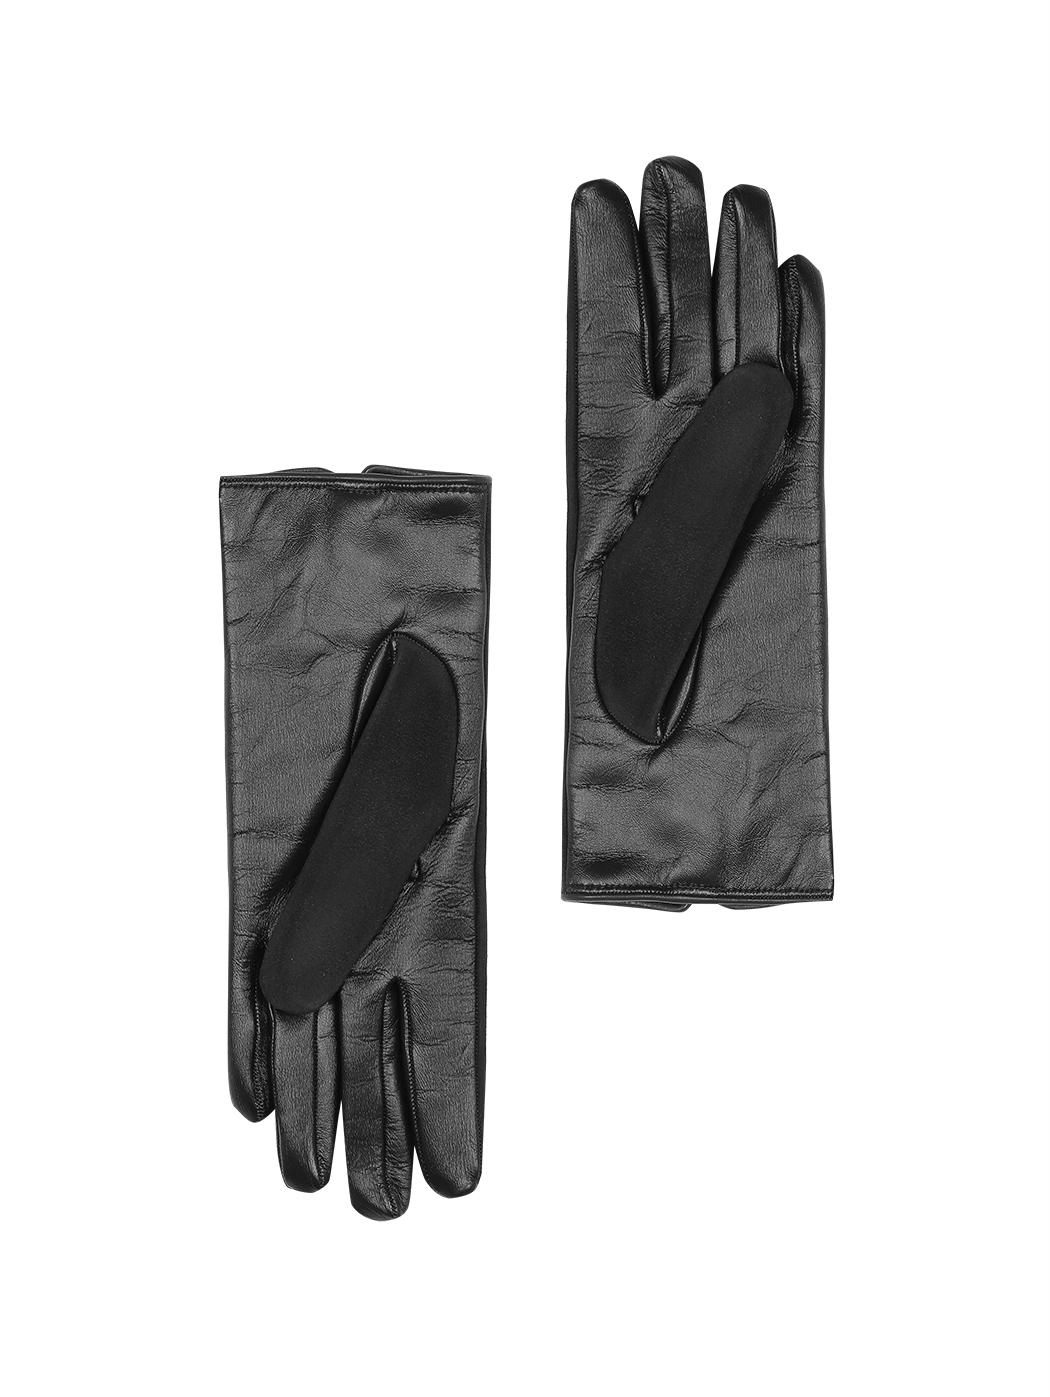 Women's Touchscreen Gloves In Leather Black